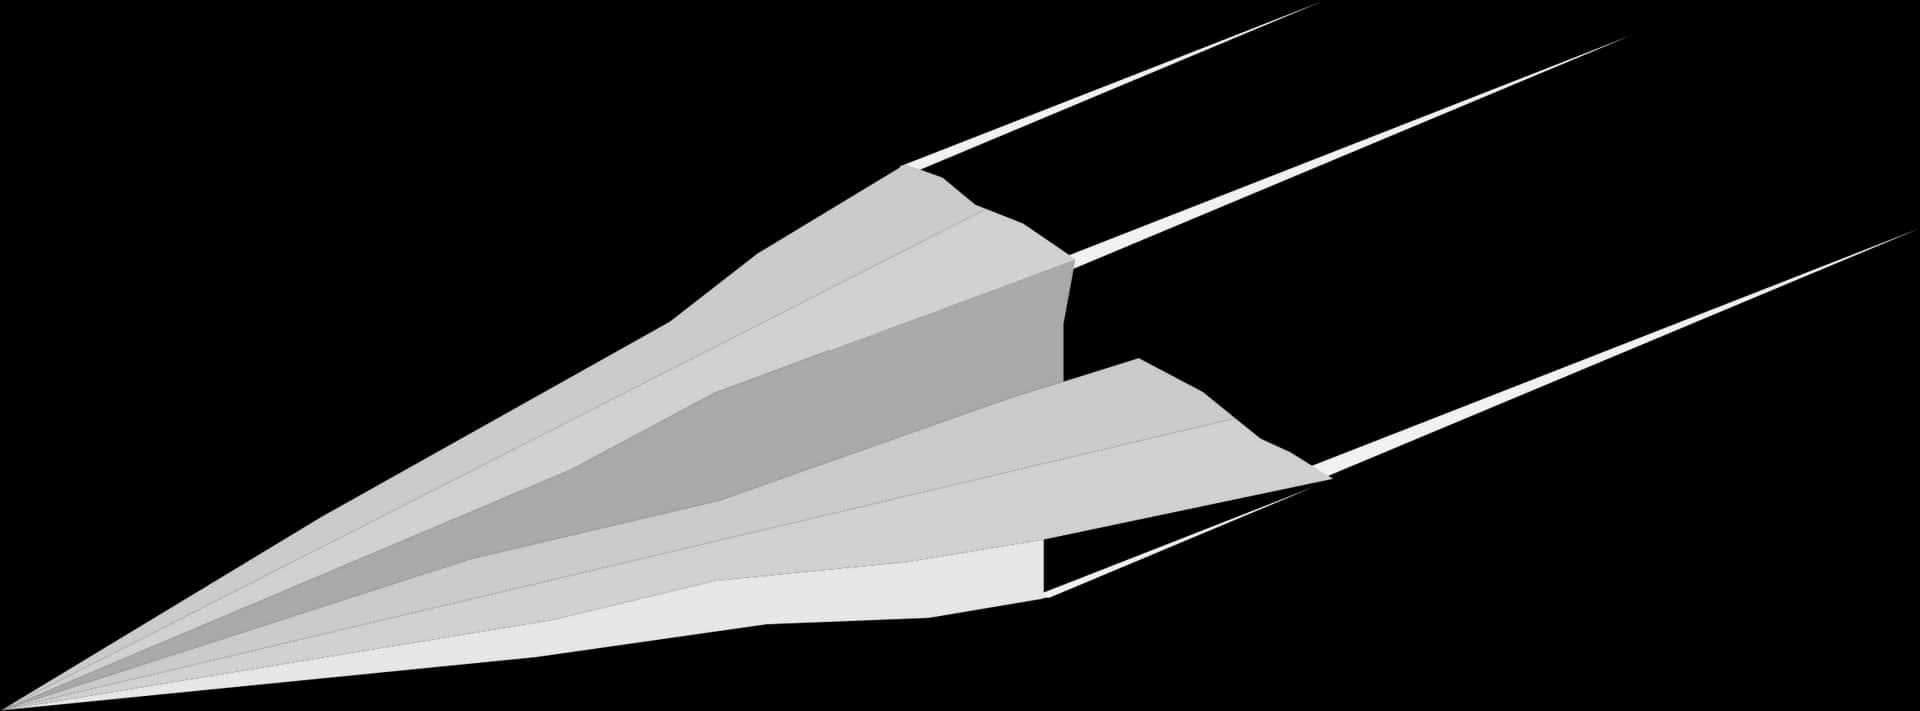 Abstract Paper Airplane Graphic PNG